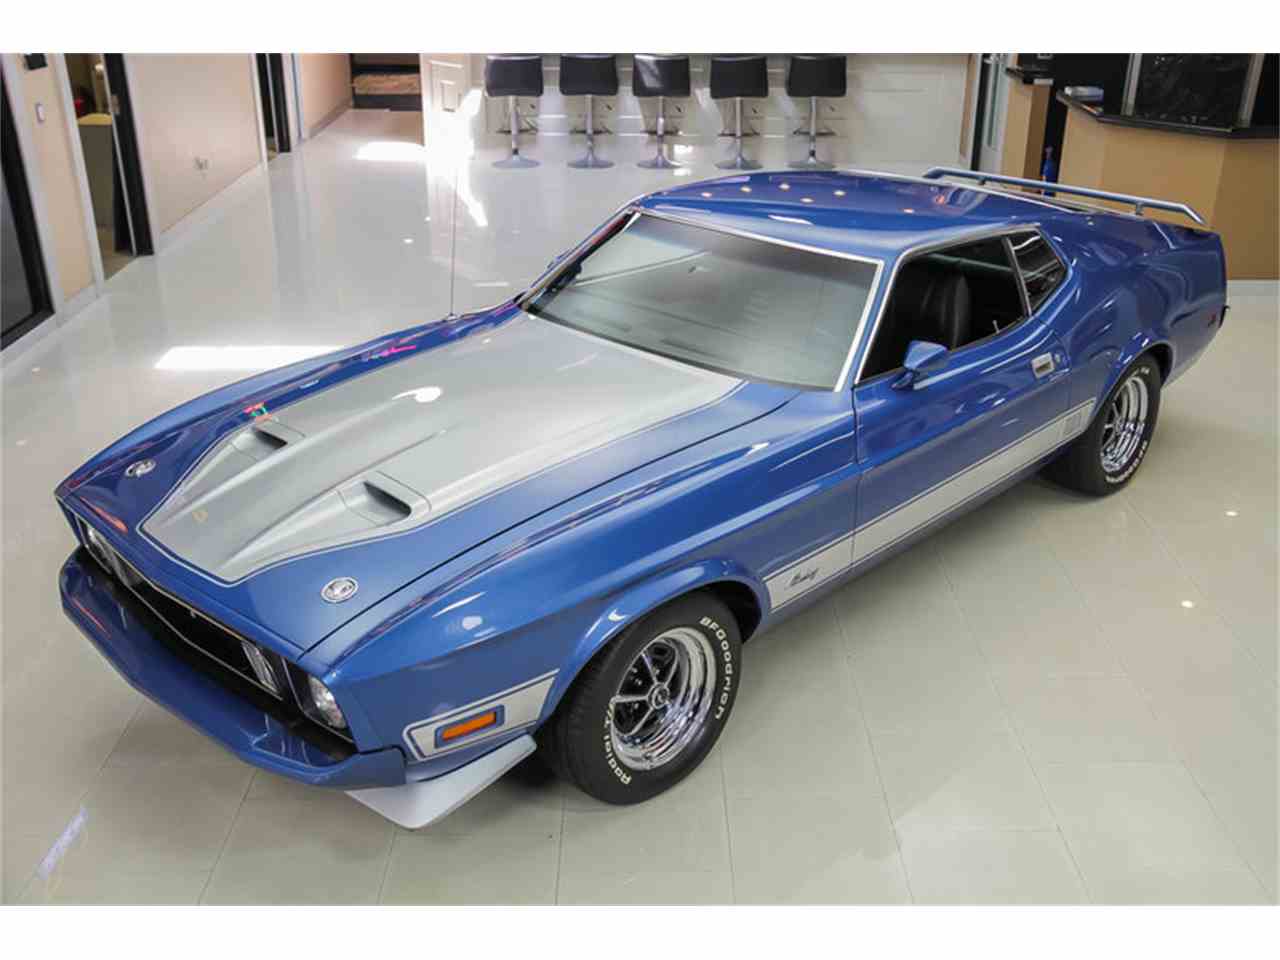 1973 Ford Mustang Mach 1 Q Code for Sale | ClassicCars.com | CC-904501